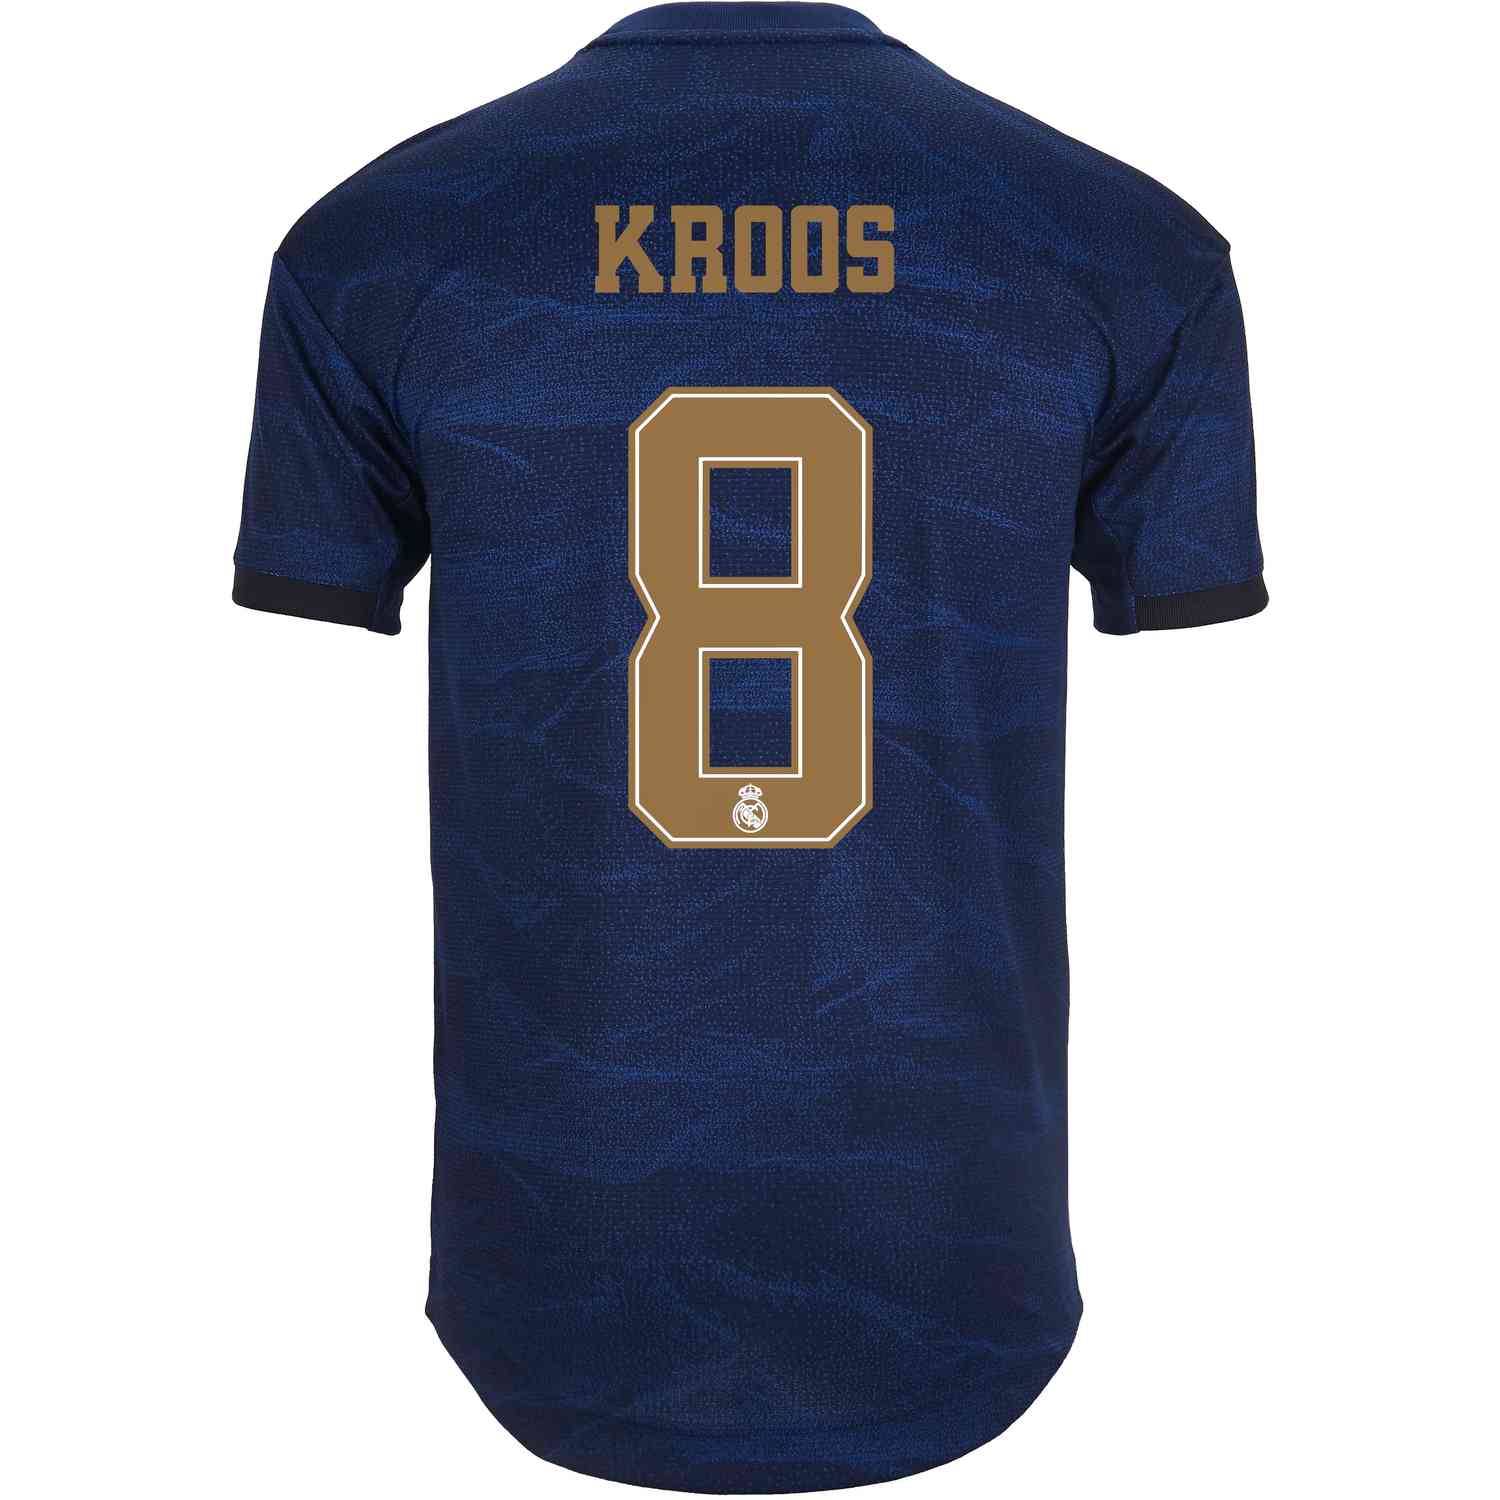 2019/20 Toni Kroos Real Madrid Away Authentic Jersey - Soccer Master